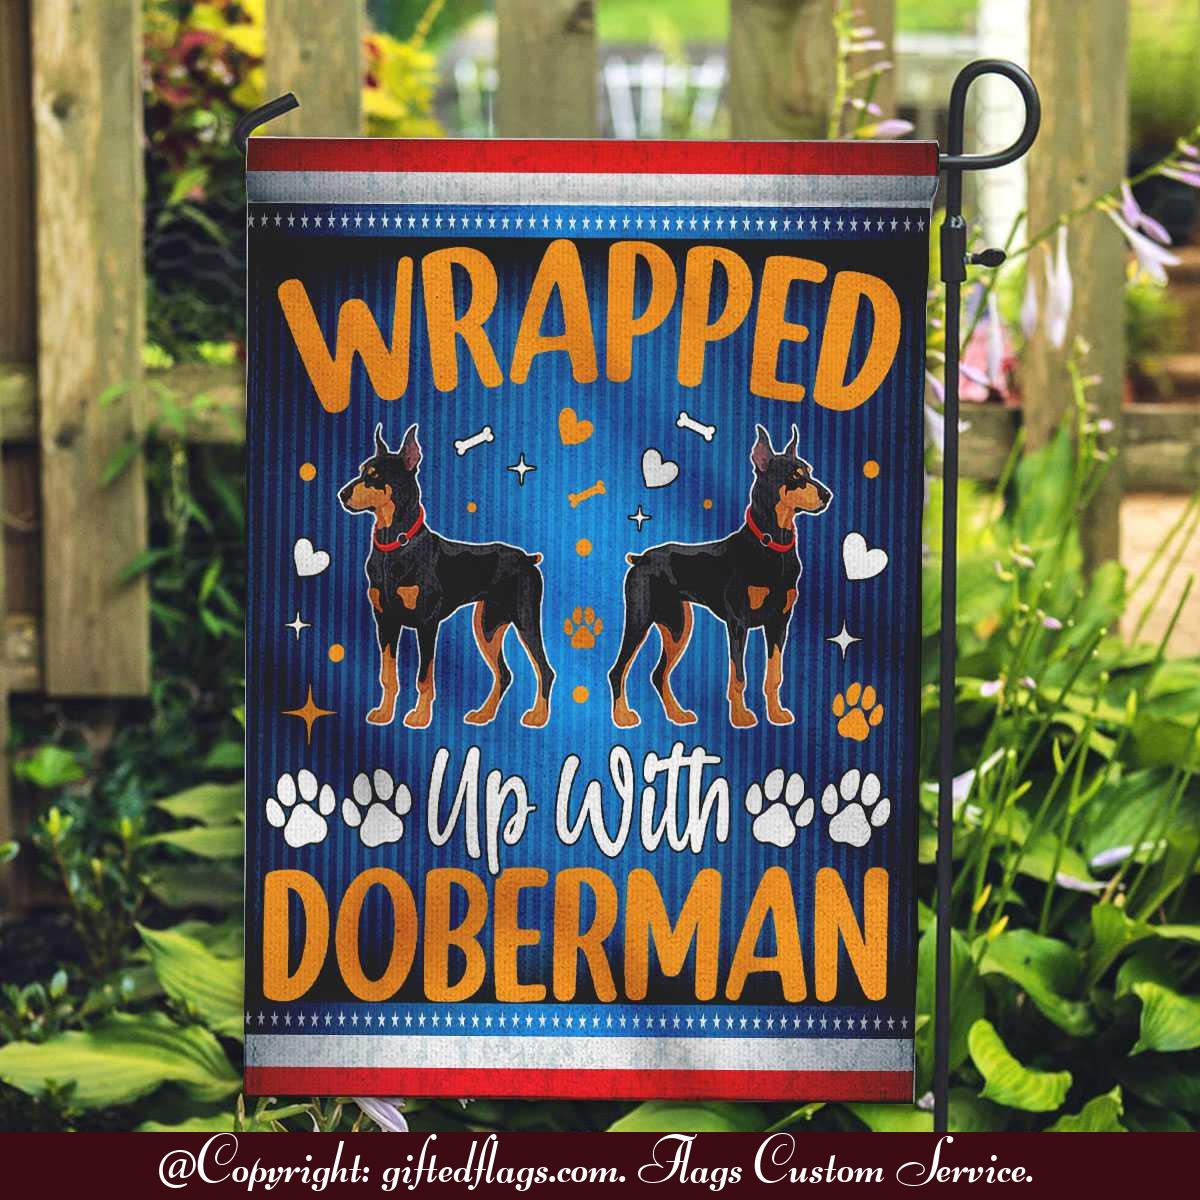 Wrapped Up With Doberman Dog Funny Garden Flag, House Flag